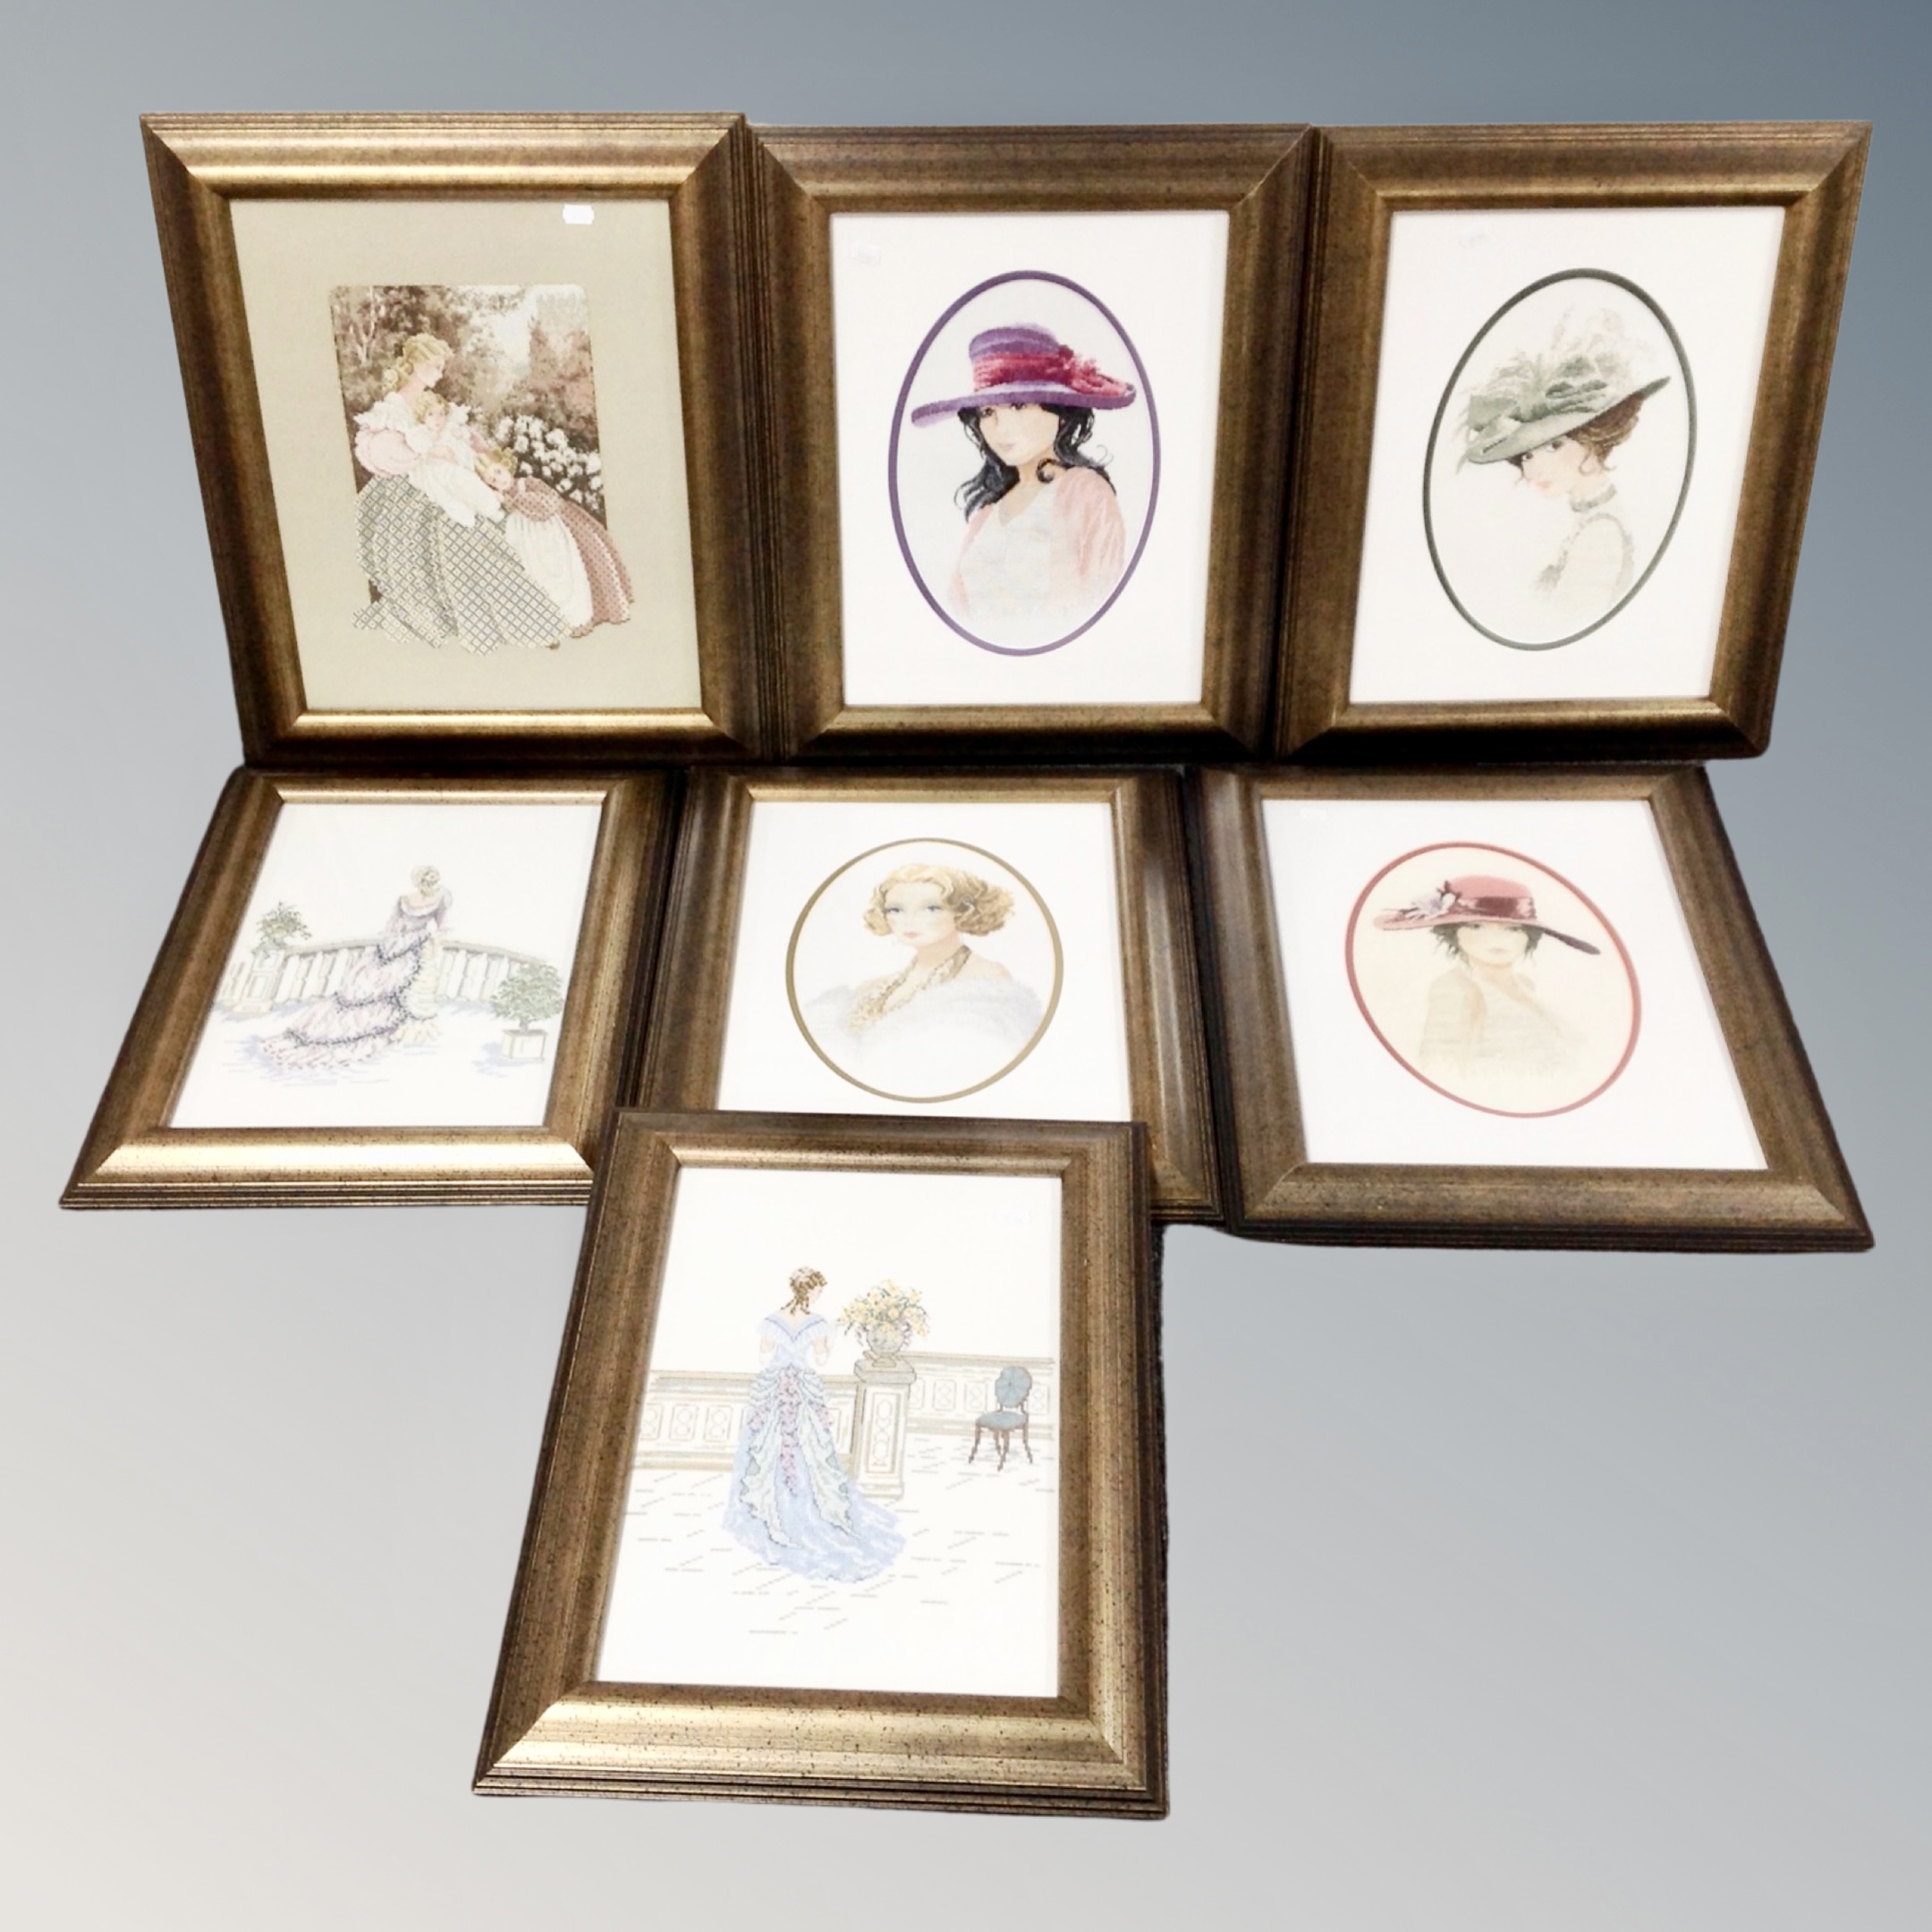 Seven needlework pictures, portraits and ladies in Victorian dress, framed.